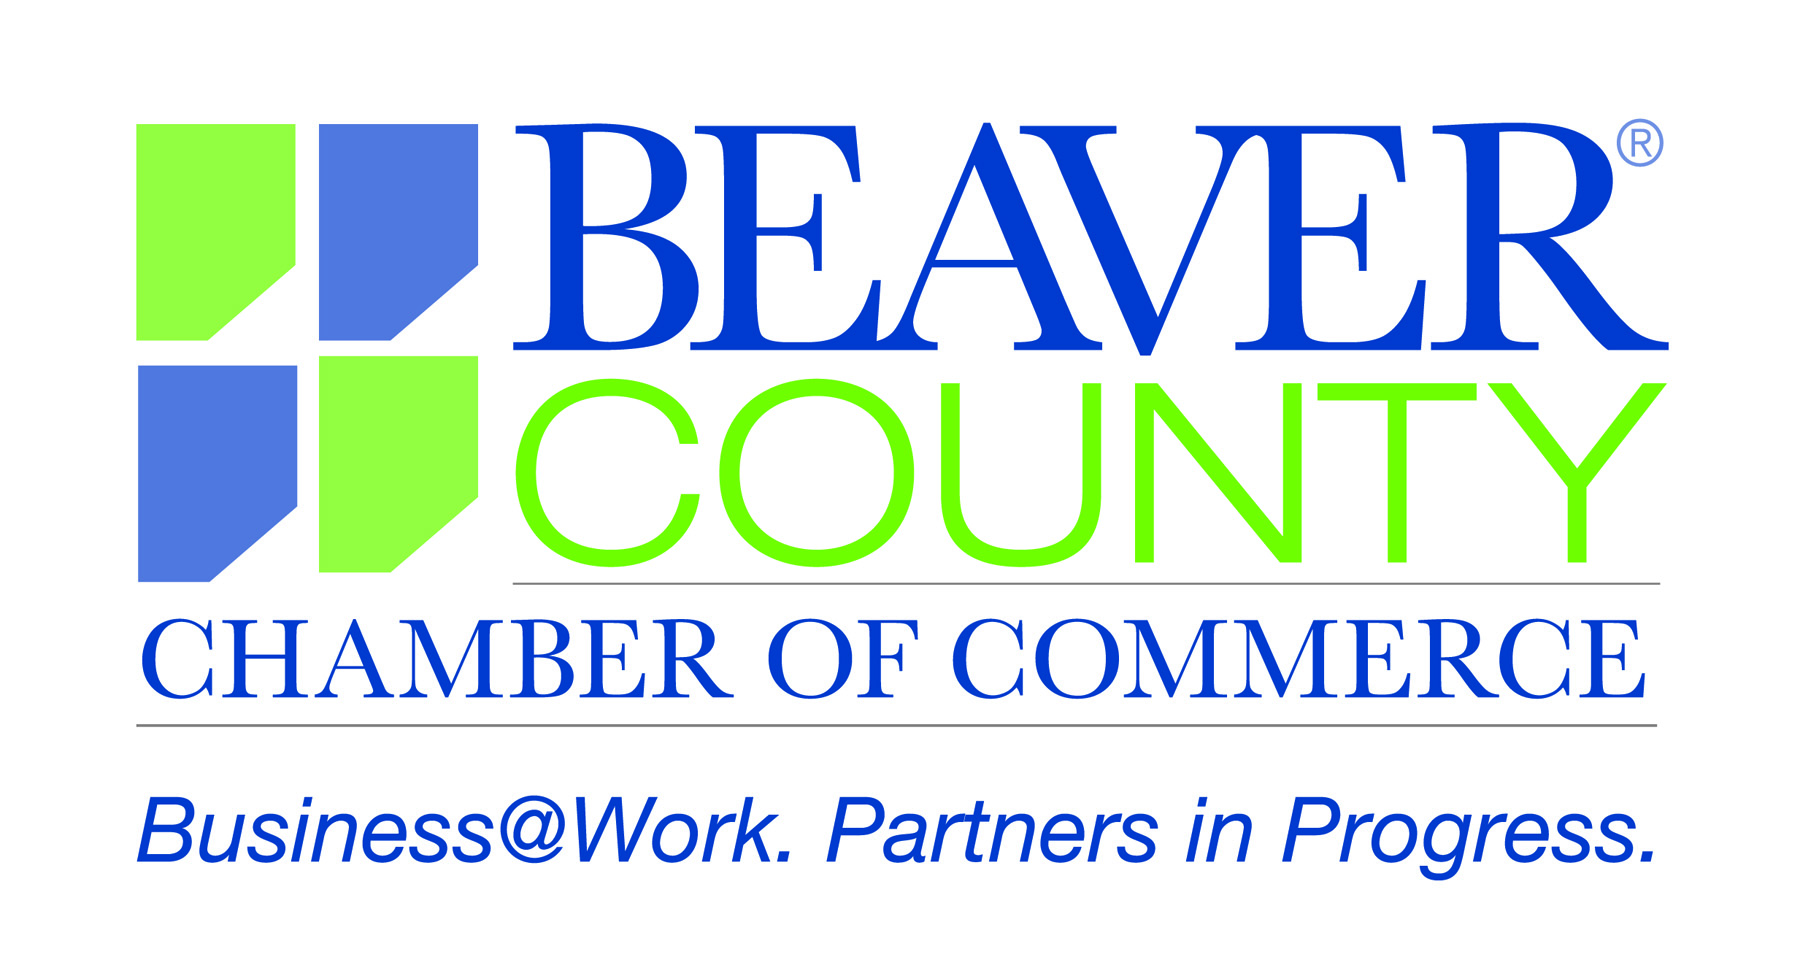 Rooted Locally Beaver County Gift Card logo